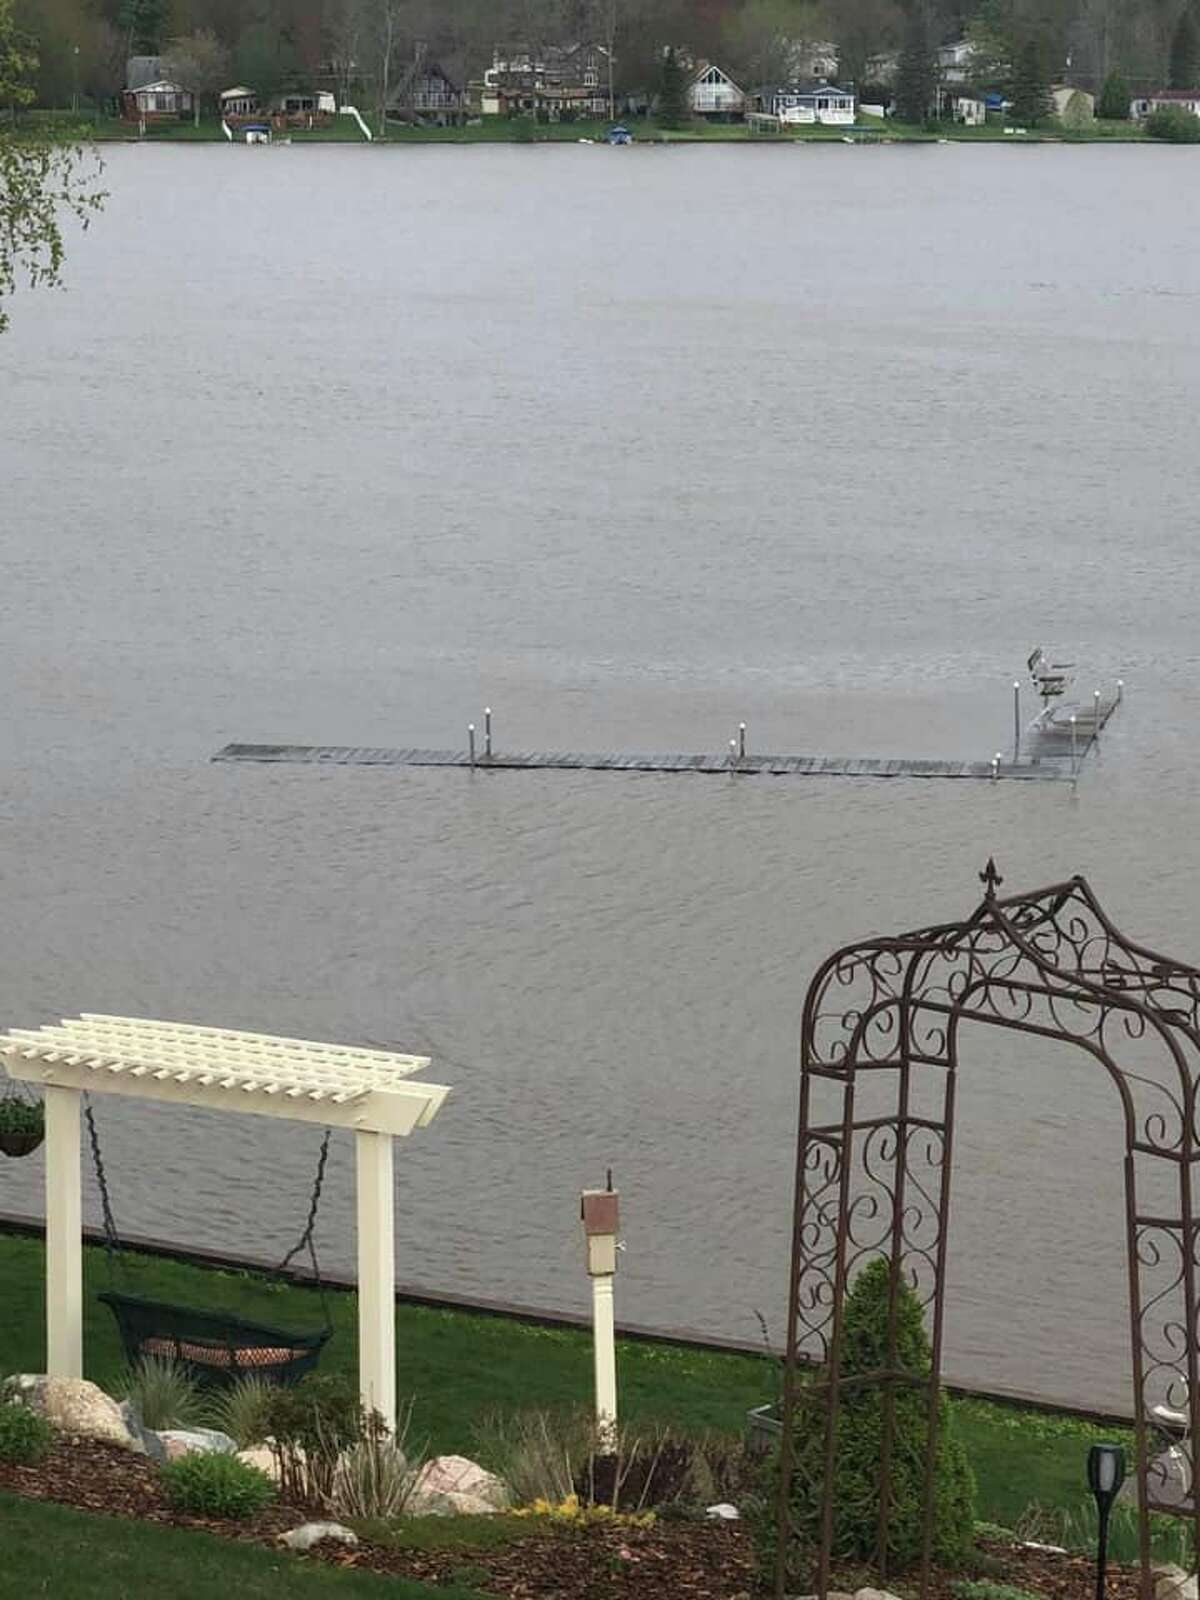 Readers submit photos after heavy rains in May 2020. Tina Marie Alwood saud: "Someone’s dock just floated by our house. 9:25am"